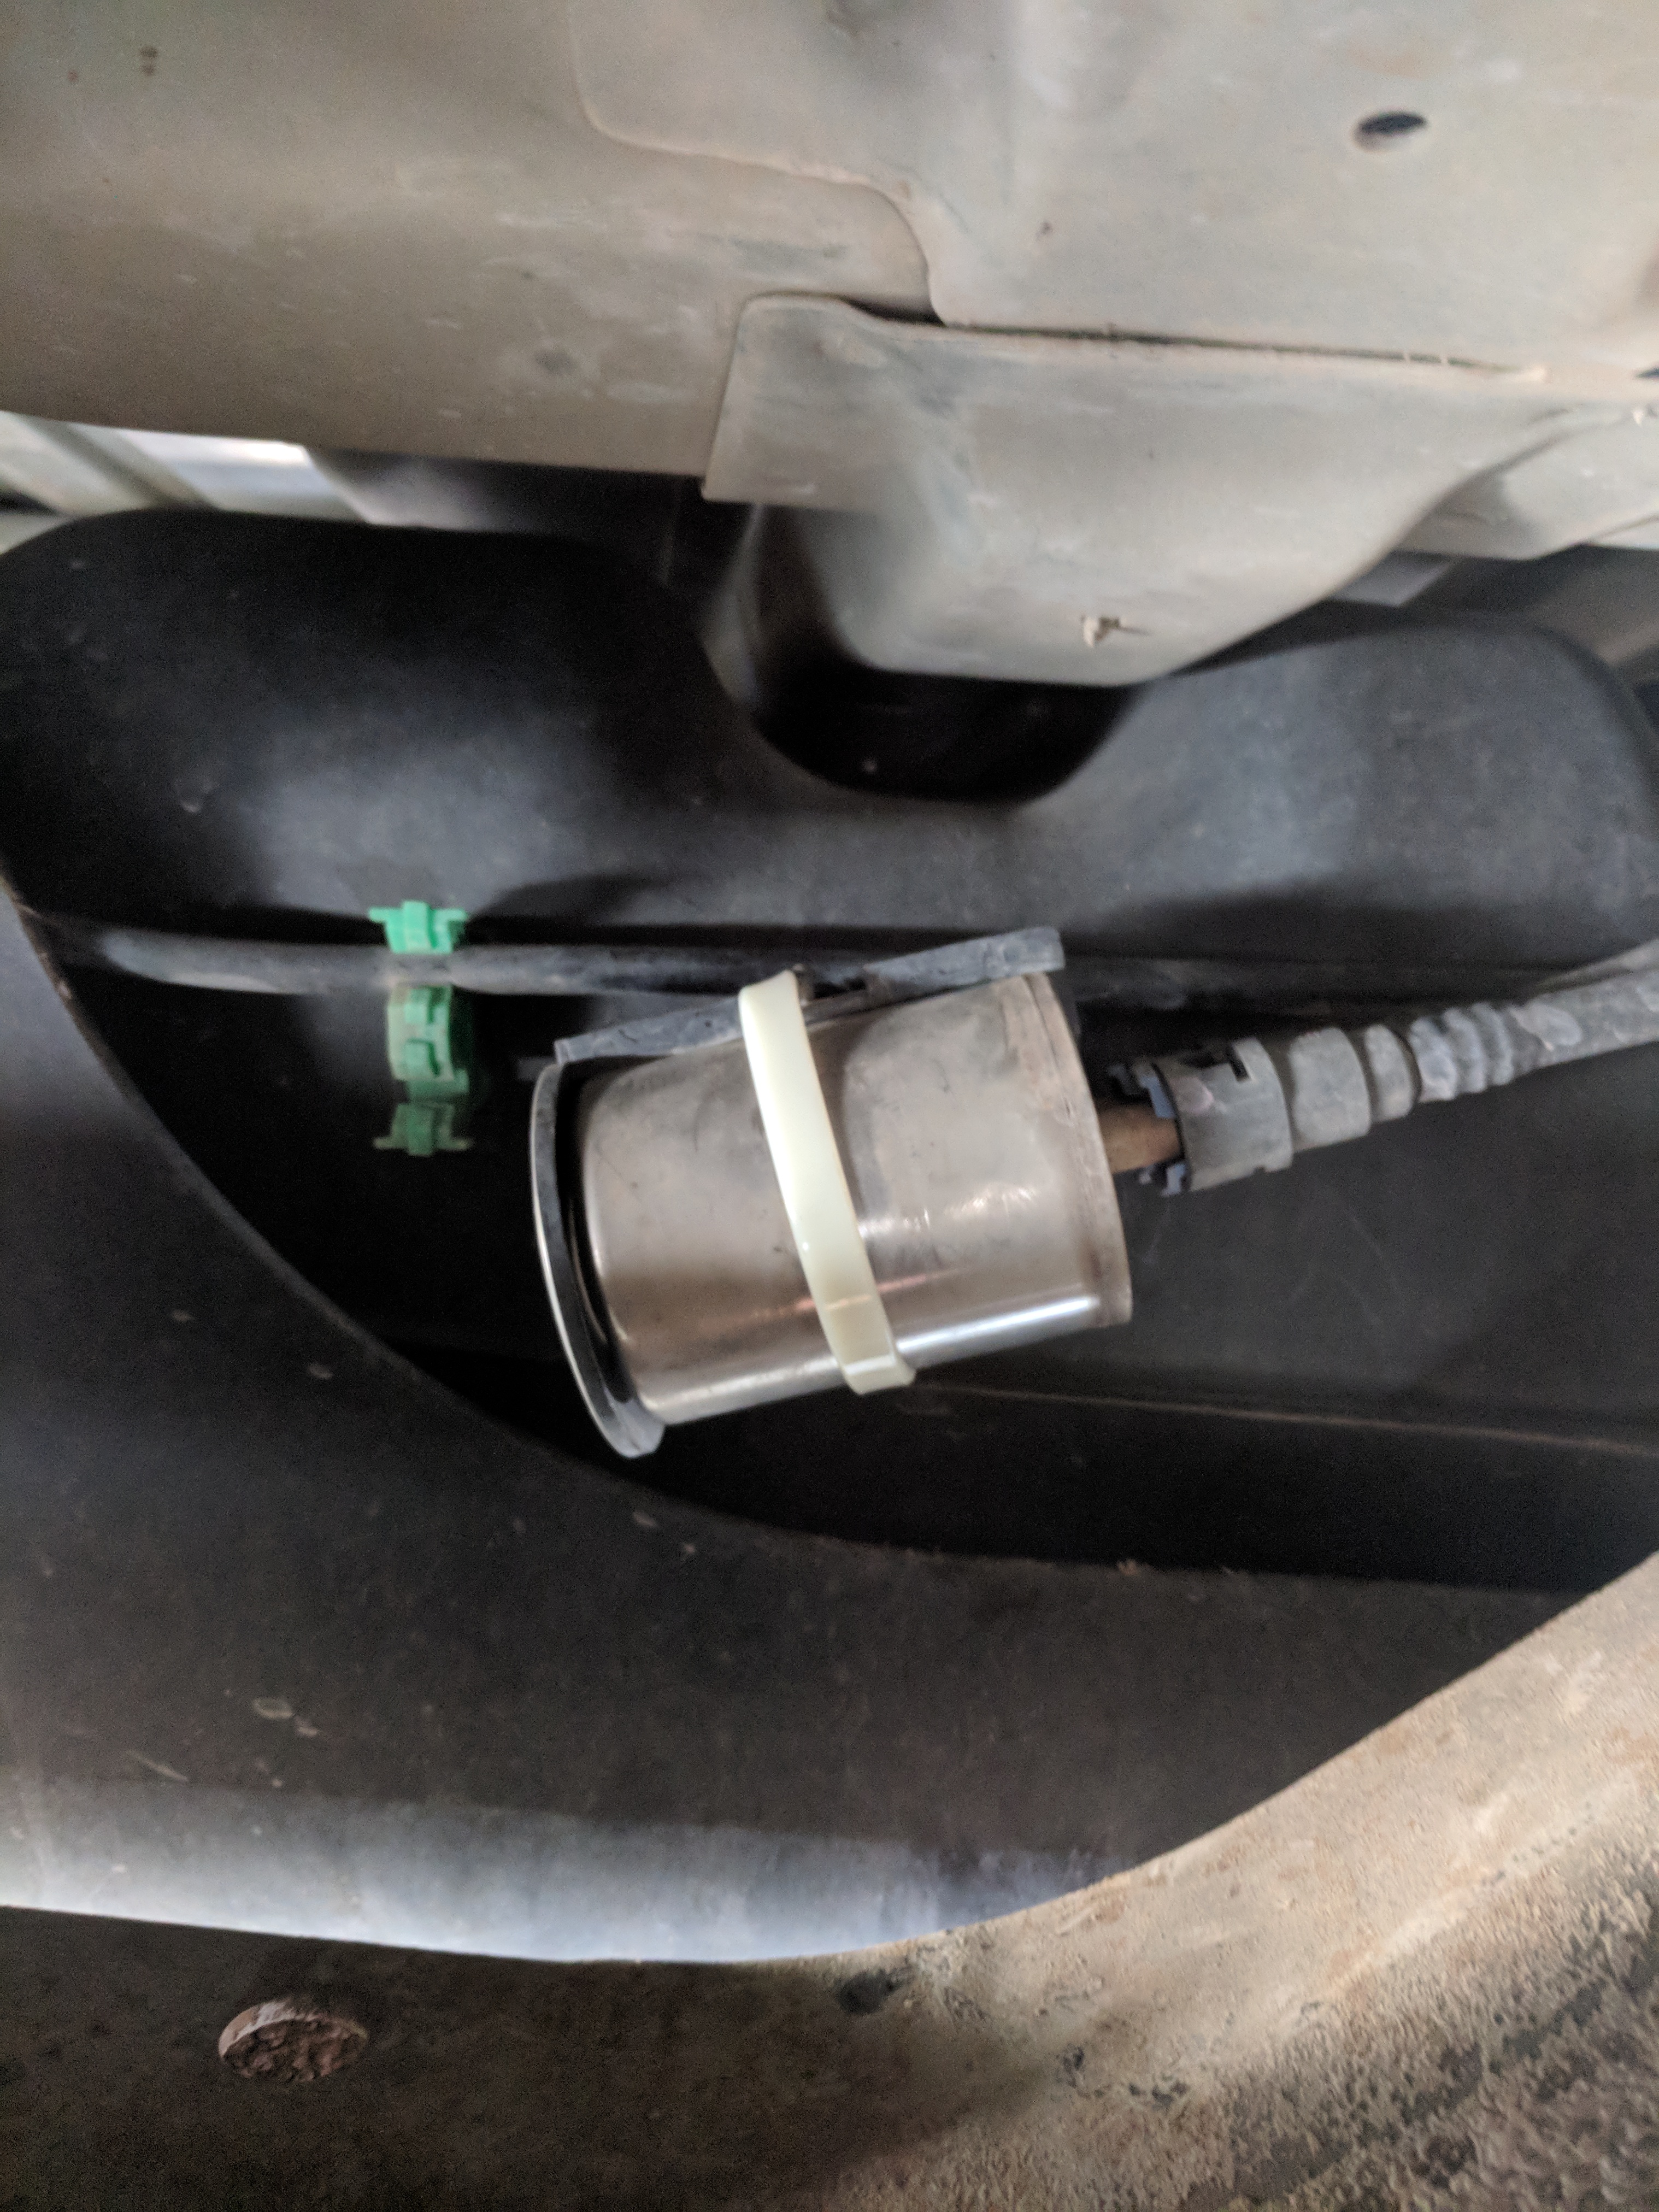 2003 Hummer H2 Owners - Check Your Fuel Filter! - Hummer Forums